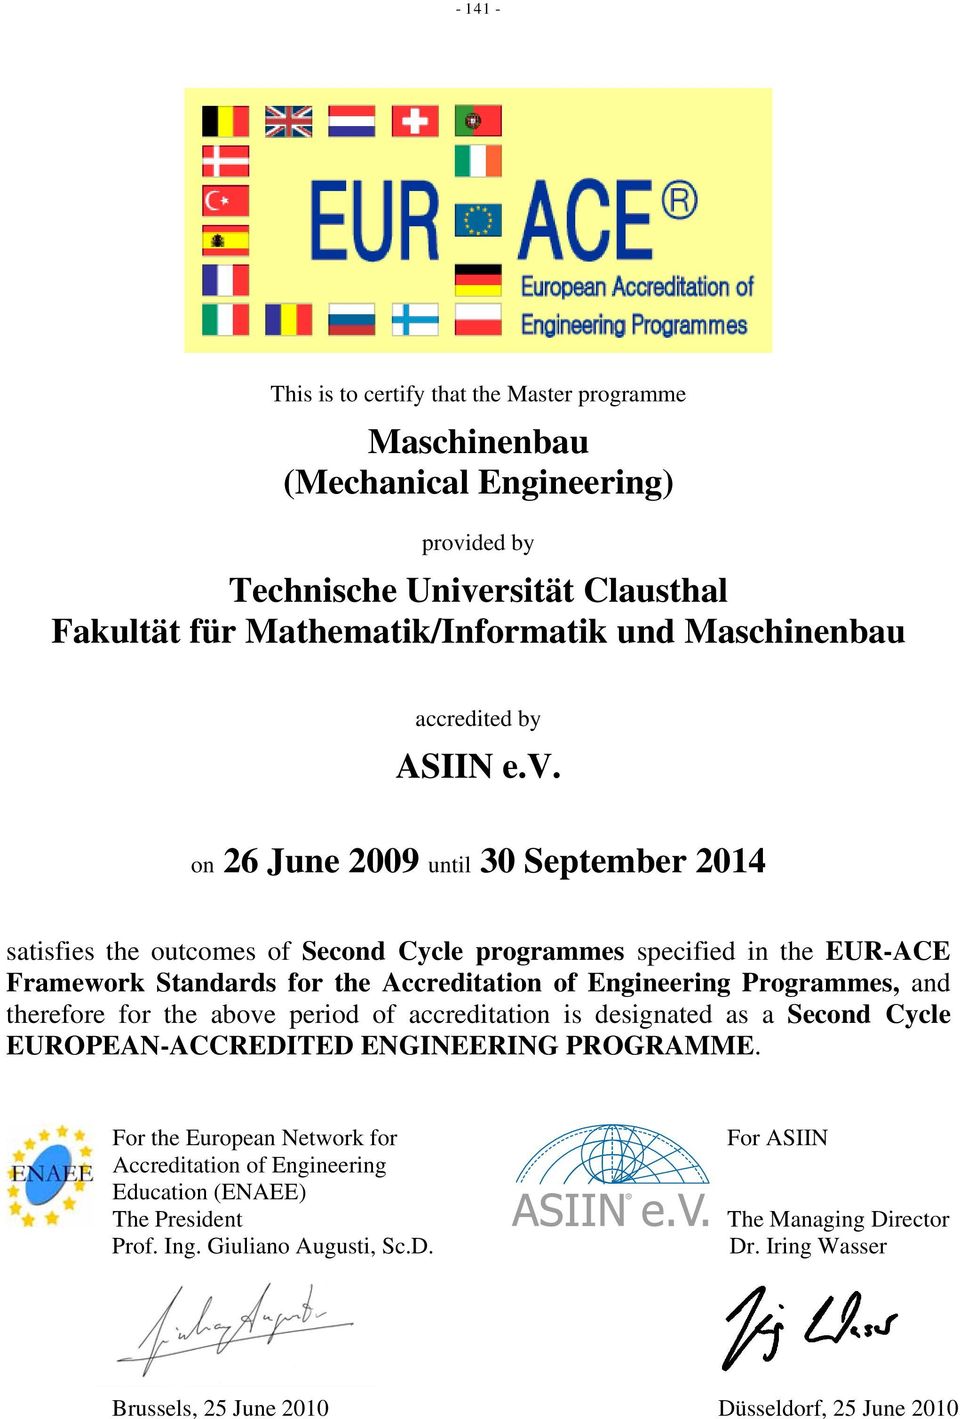 on 26 June 2009 until 30 September 2014 satisfies the outcomes of Second Cycle programmes specified in the EUR-ACE Framework Standards for the Accreditation of Engineering Programmes,